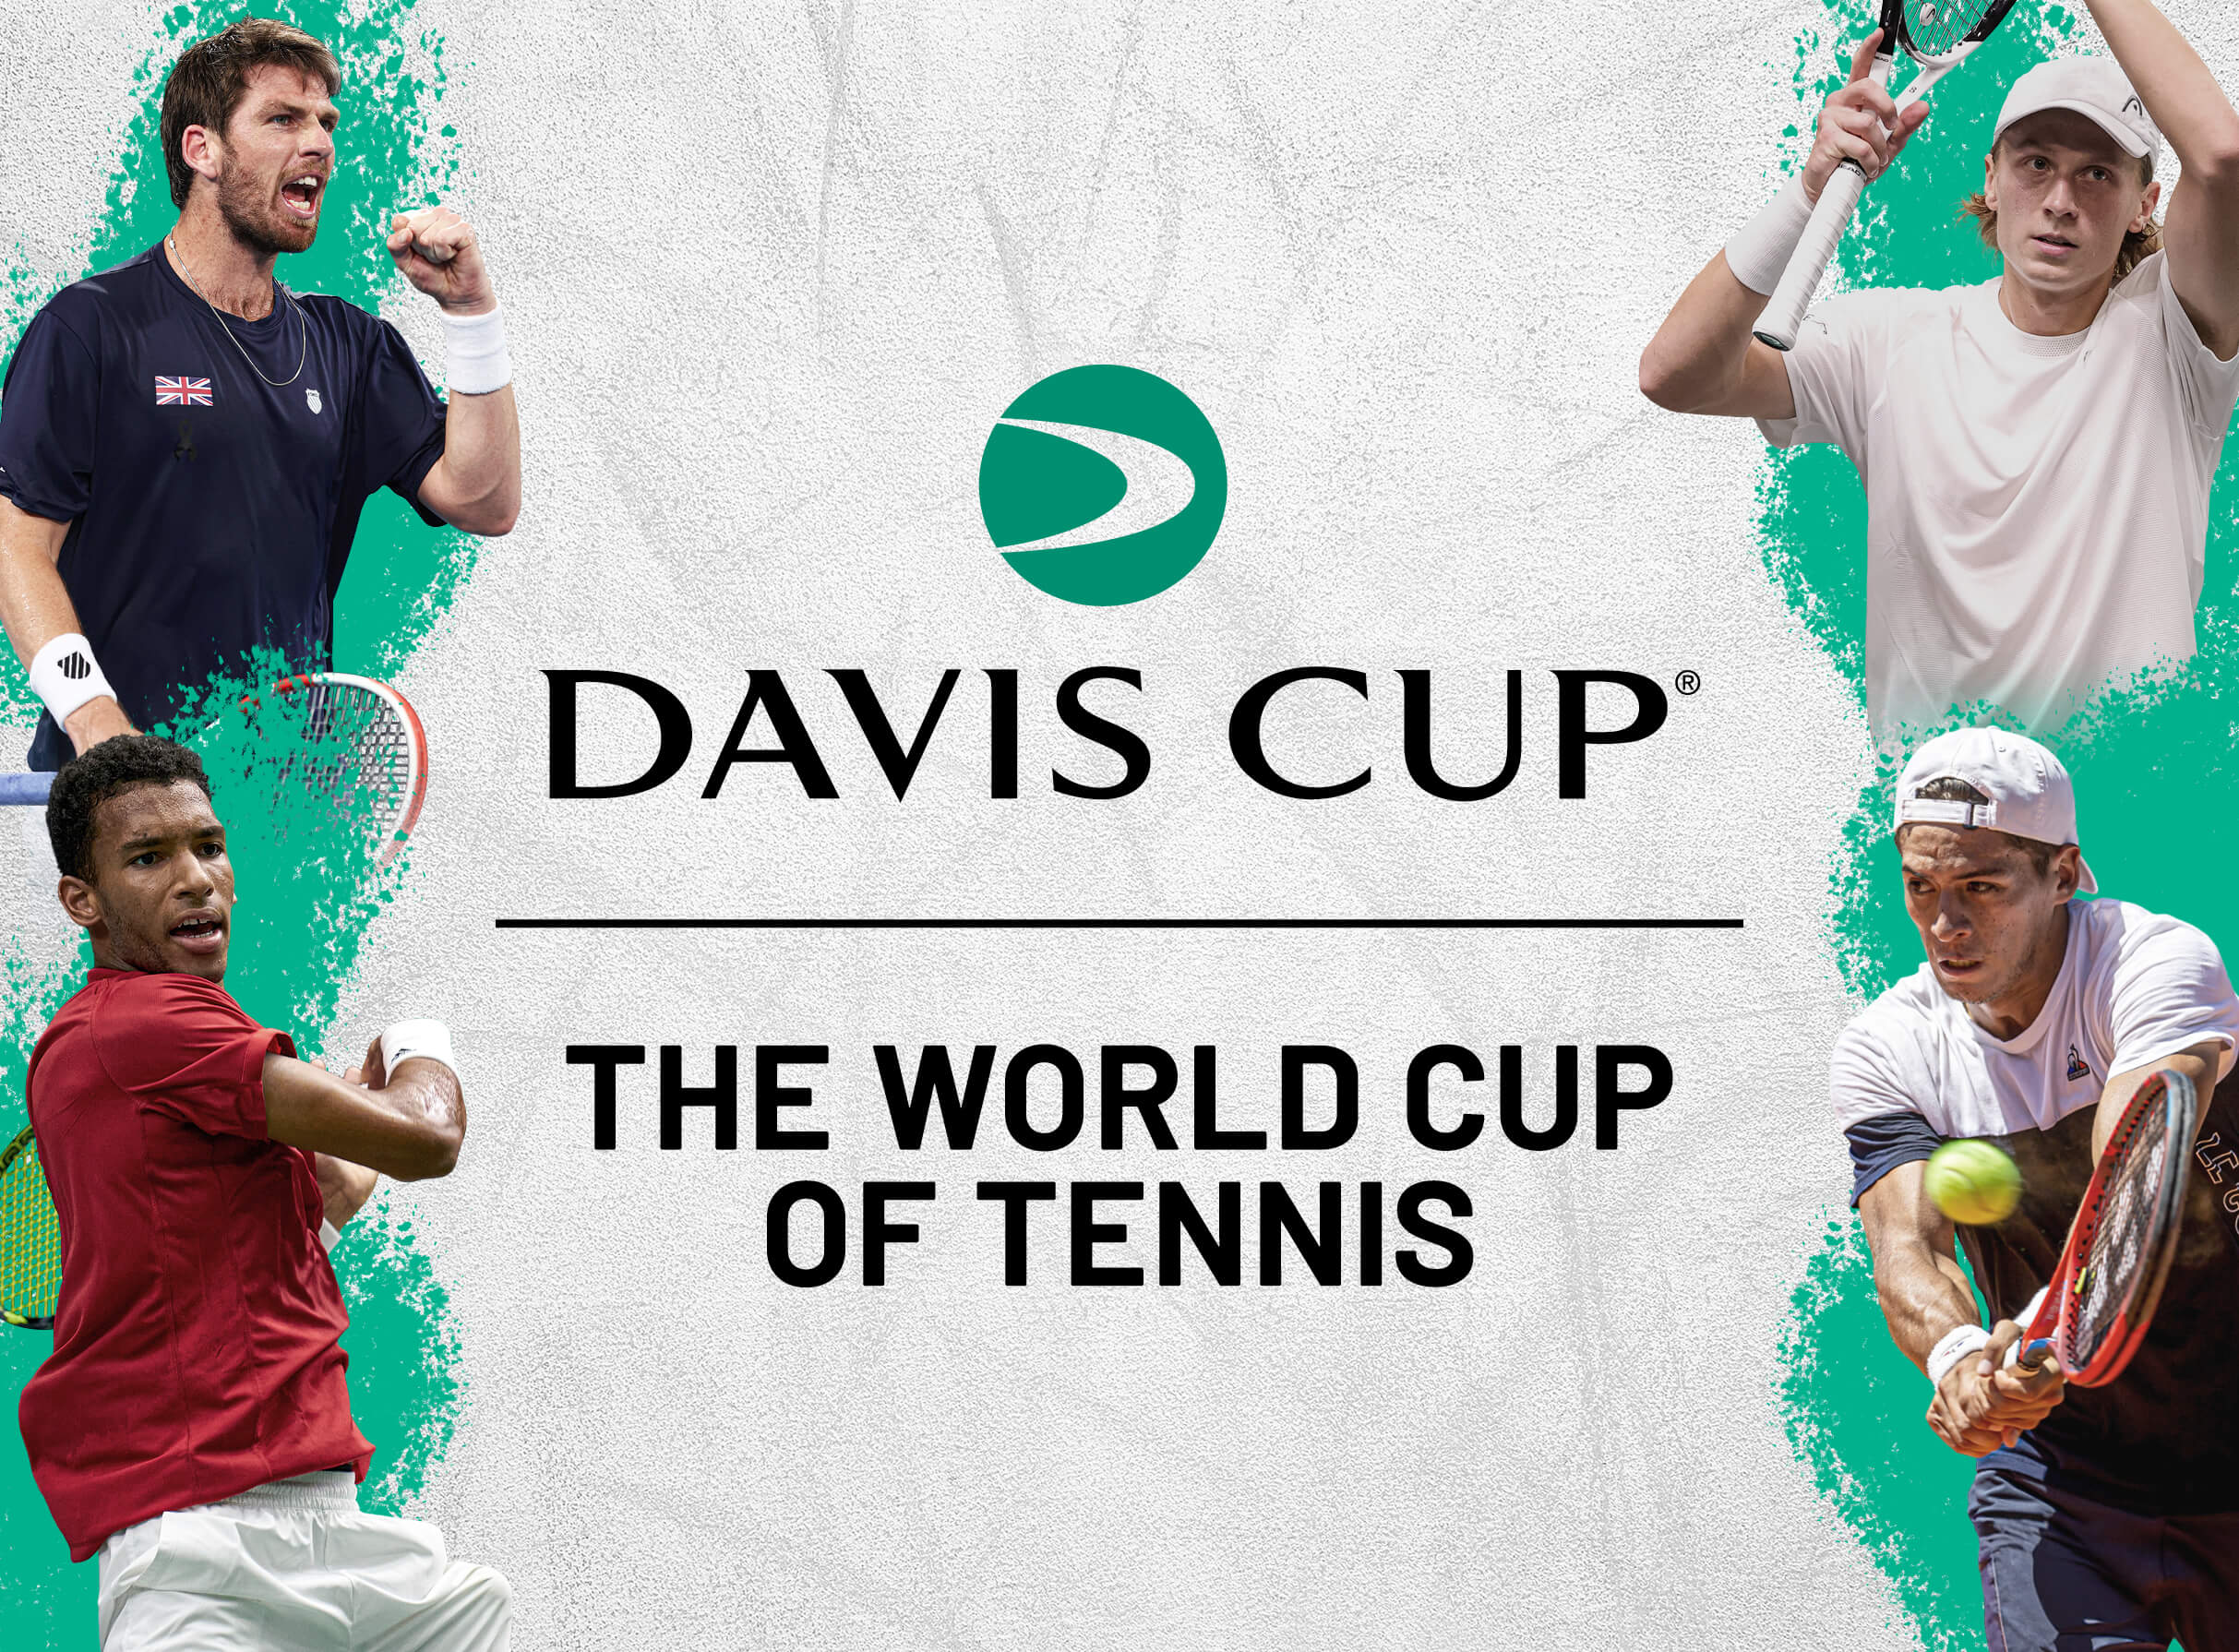 Davis Cup Group Stage Finals: Finland V Argentina in Manchester promo photo for Lta Members presale offer code